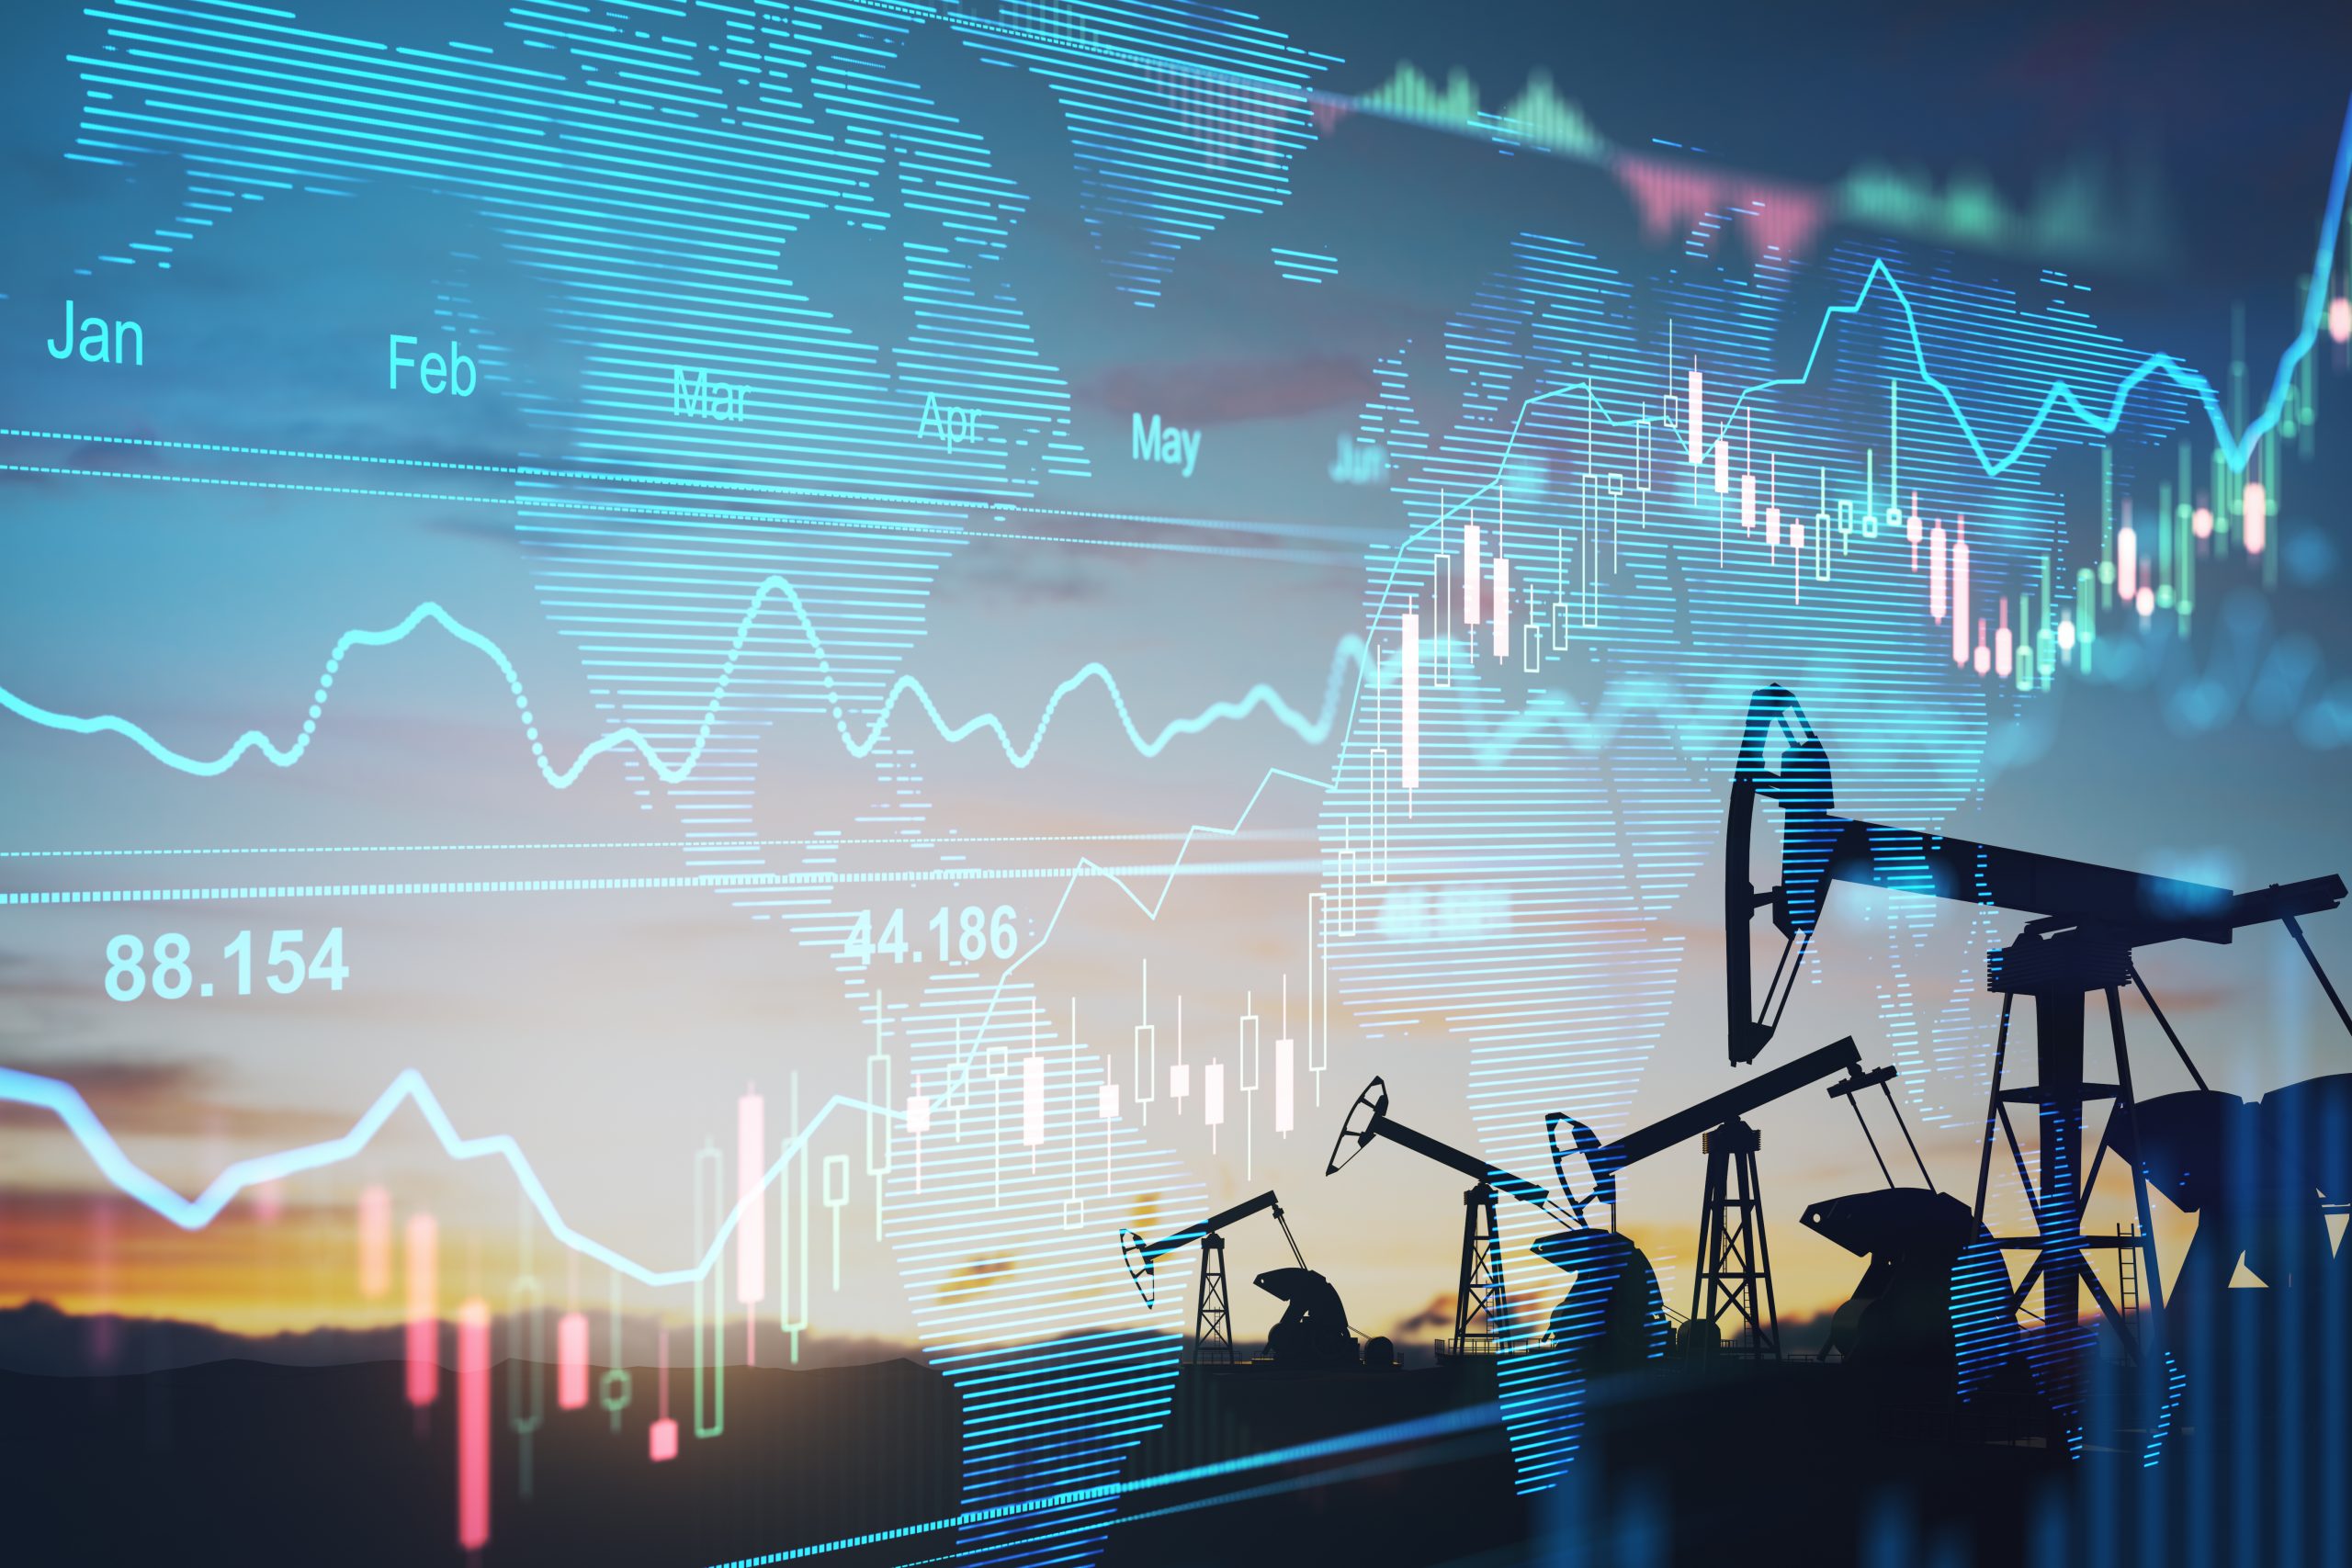 Unrecognizable oil and gas executive optimizing well performance via virtual interface. Industry and tech concept for efficient preventive maintenance, use of digital tools for improved operations.